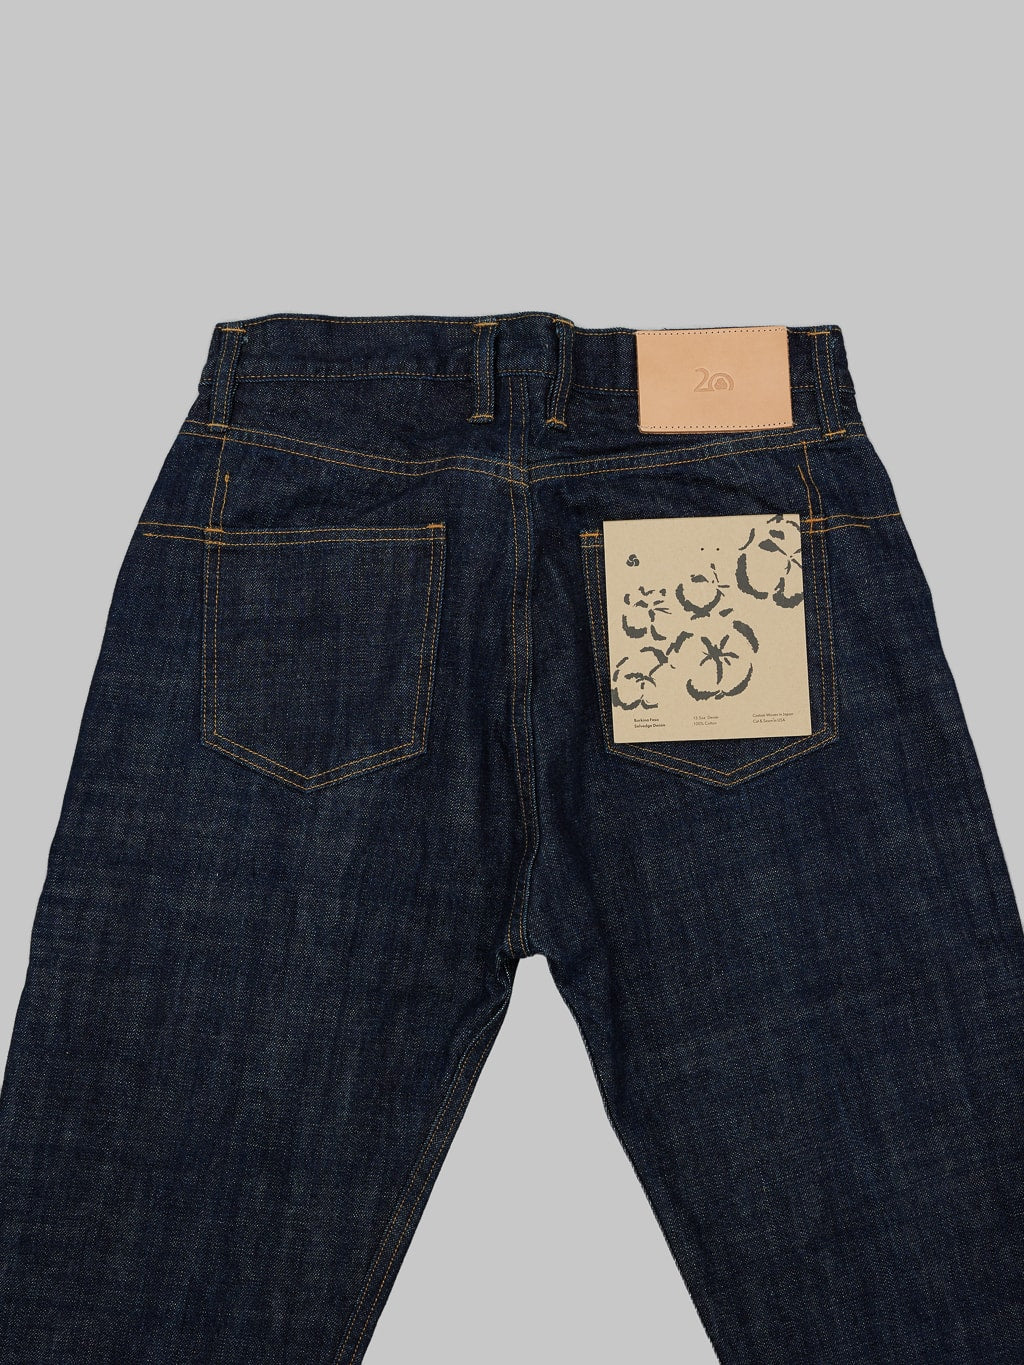 3sixteen CT 20th Anniversary Burkina Faso Classic Tapered Jeans back details